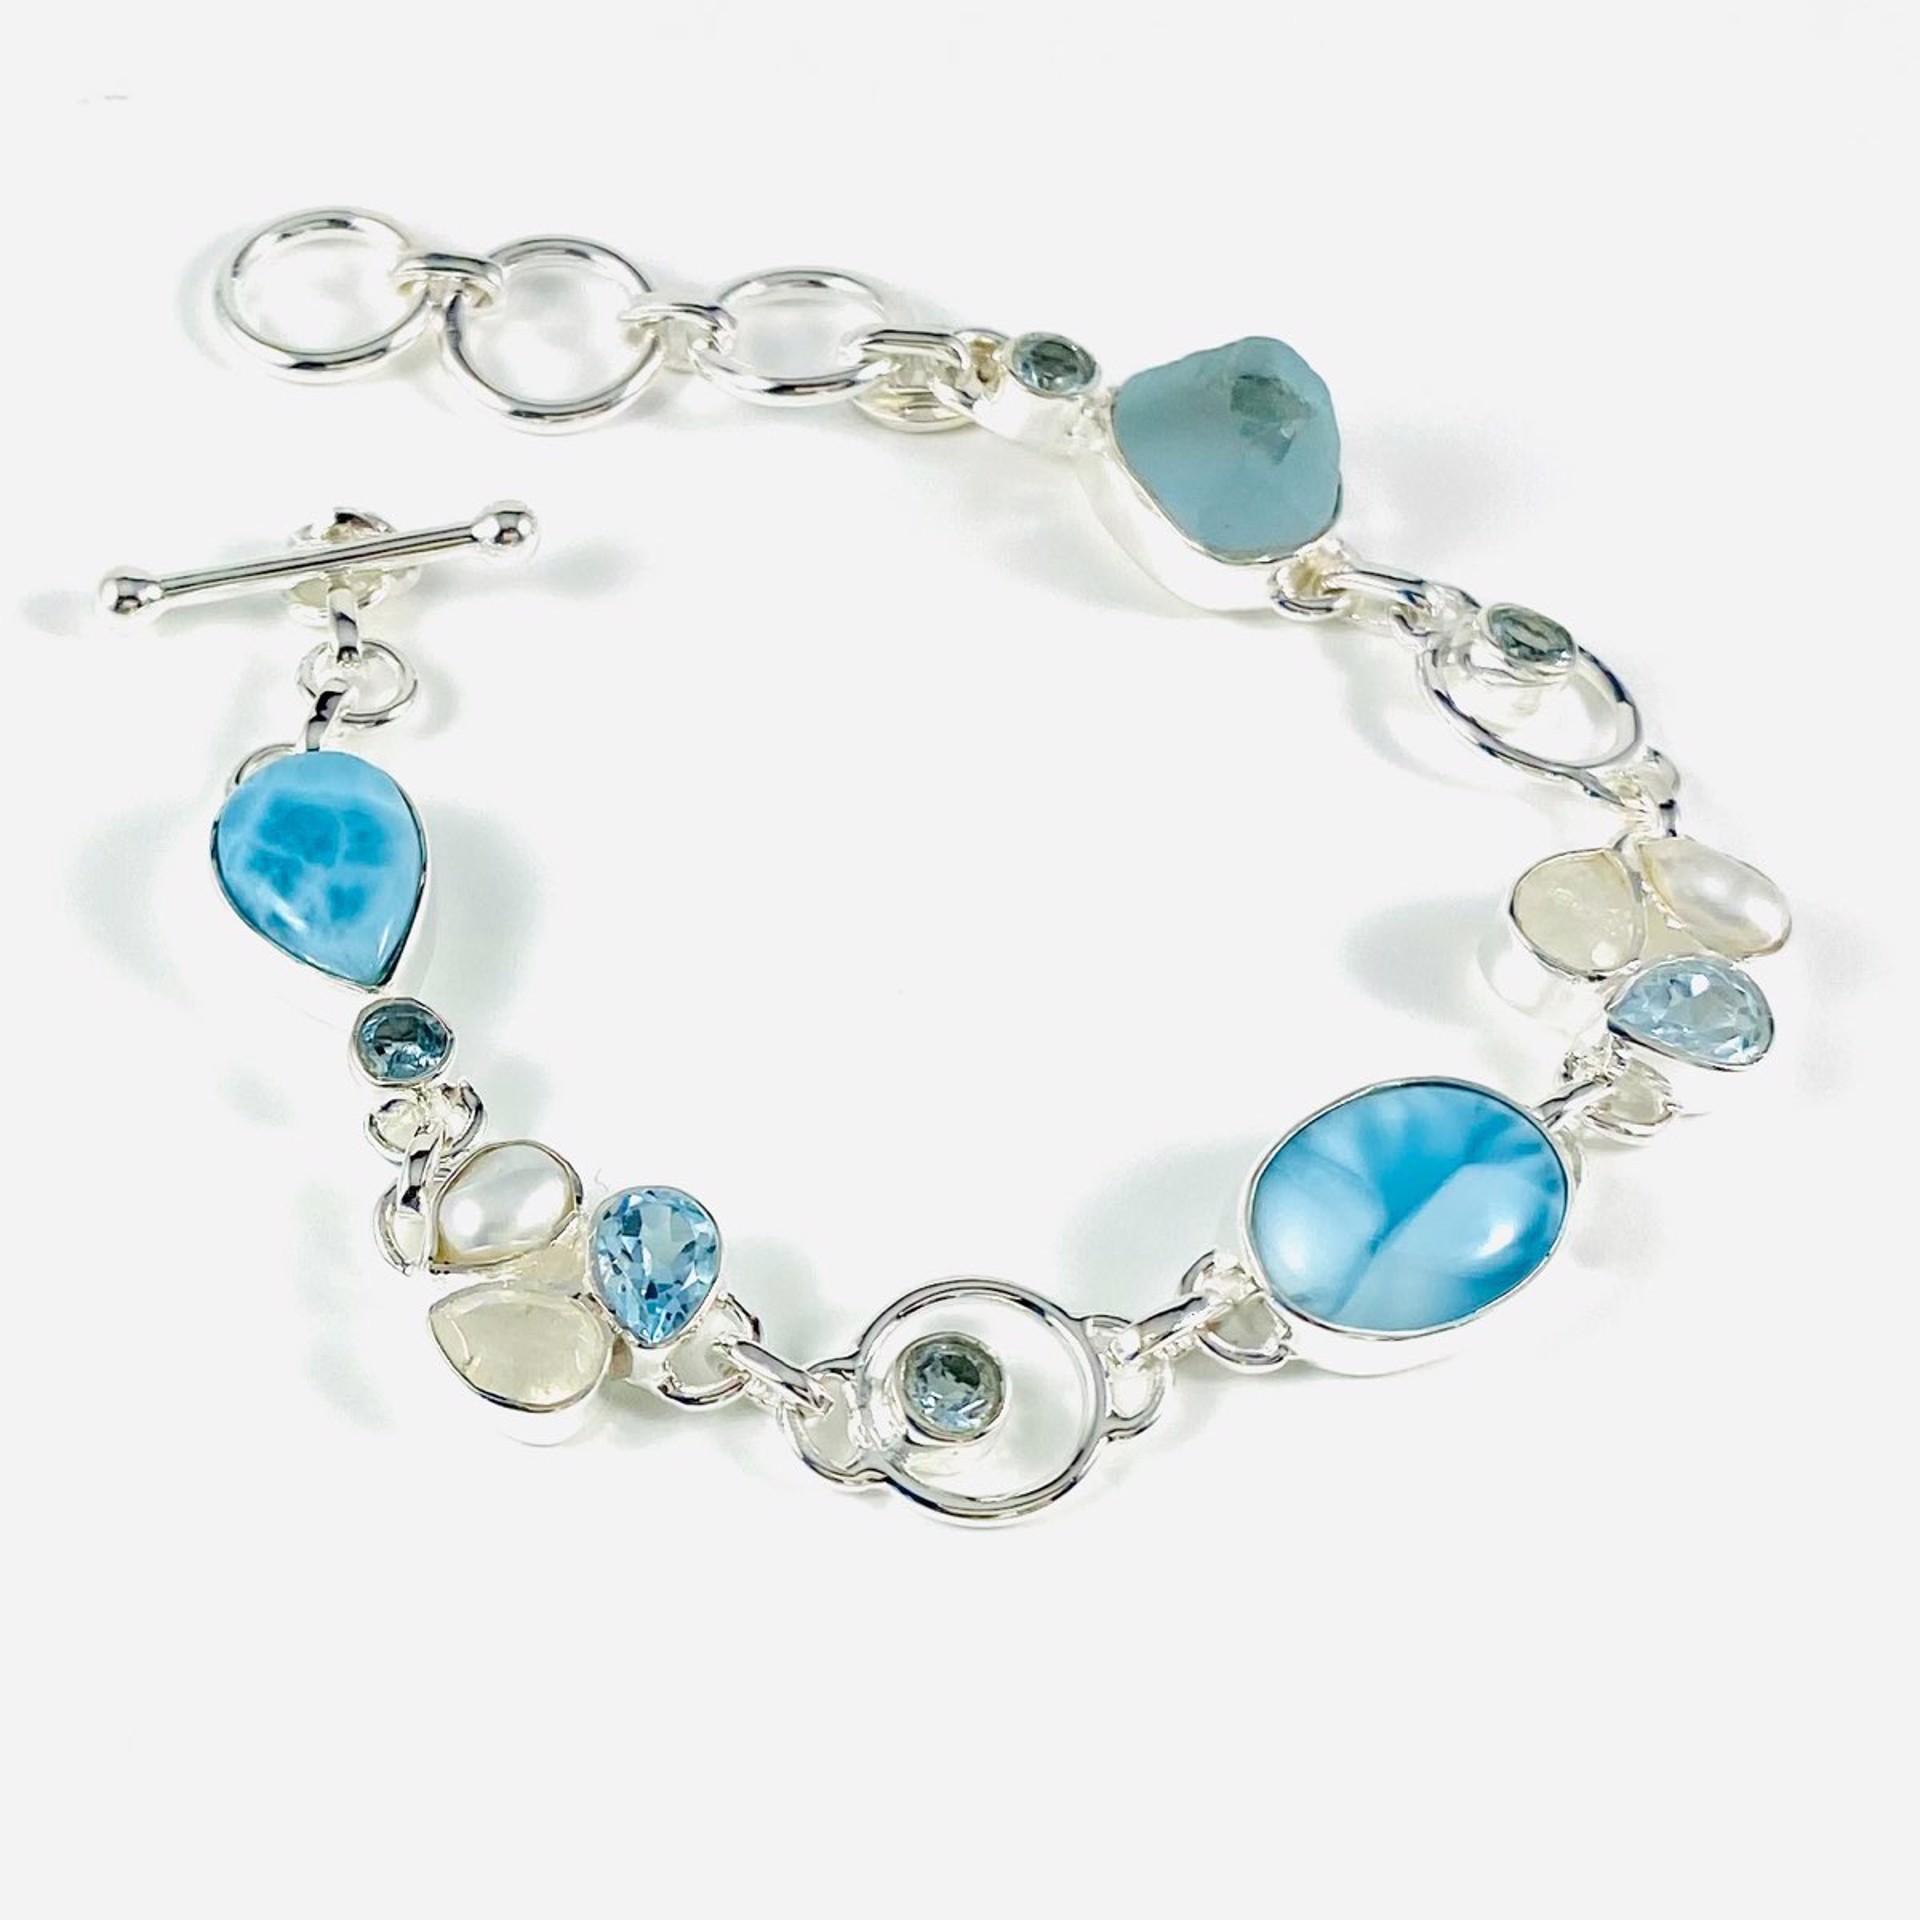 MON22-SB 96 Larimar, Blue Topaz, Moonstone and Pearl Bracelet with 1.5" ext by Monica Mehta